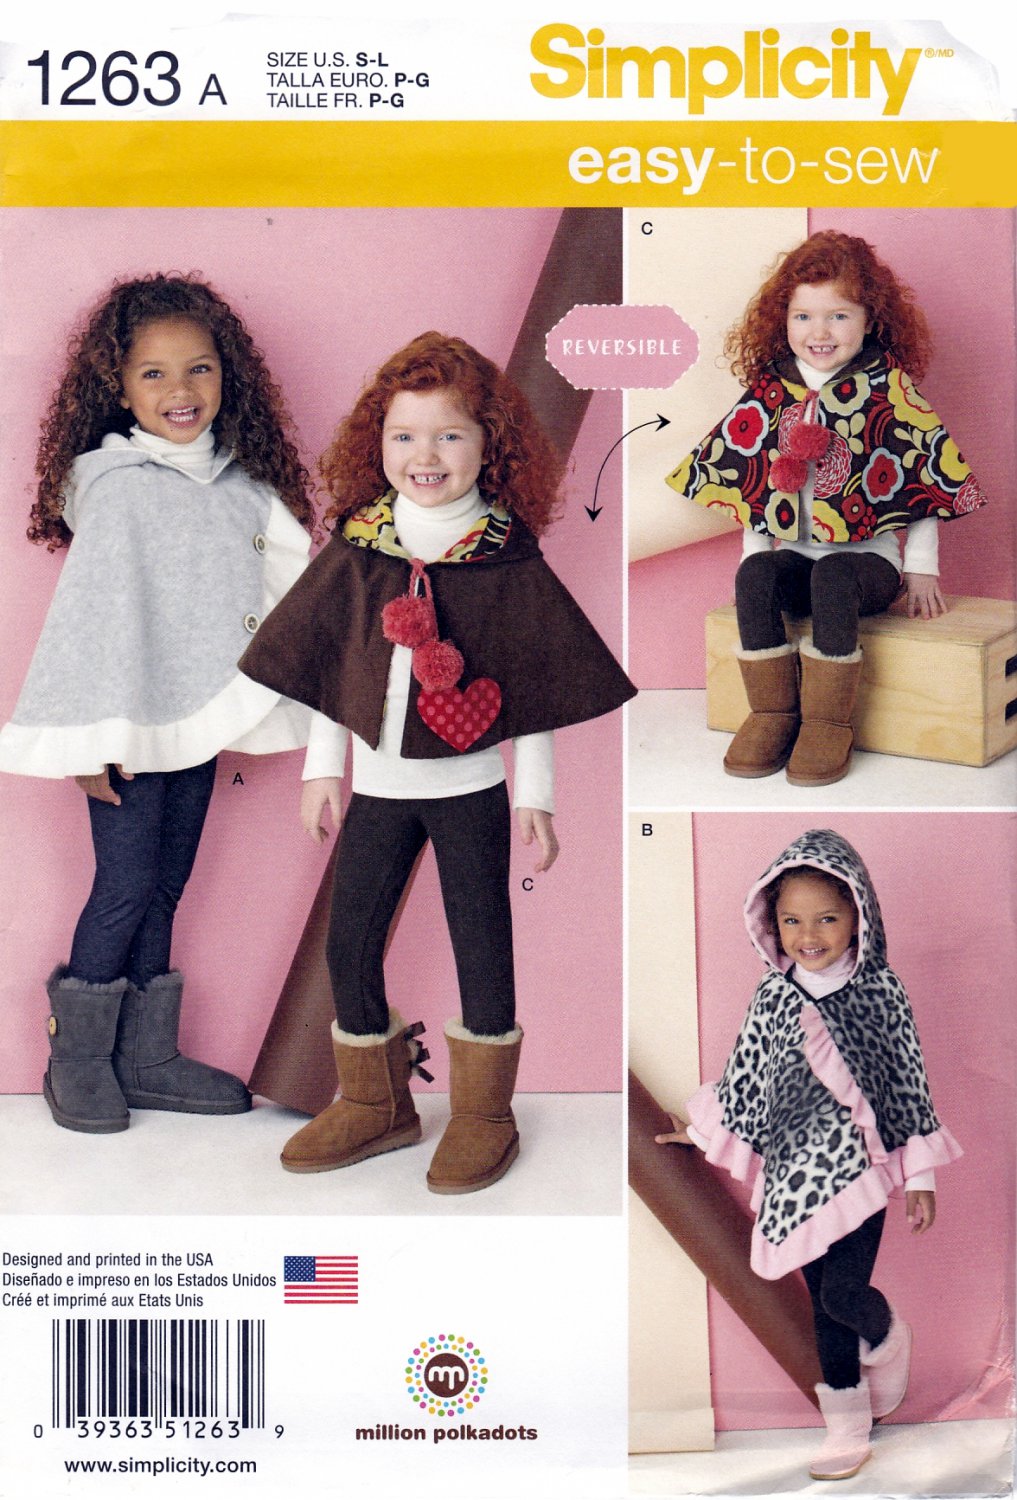 Simplicity 1263 Childs Poncho and Reversible Cape Sewing Pattern Sizes S-M-L